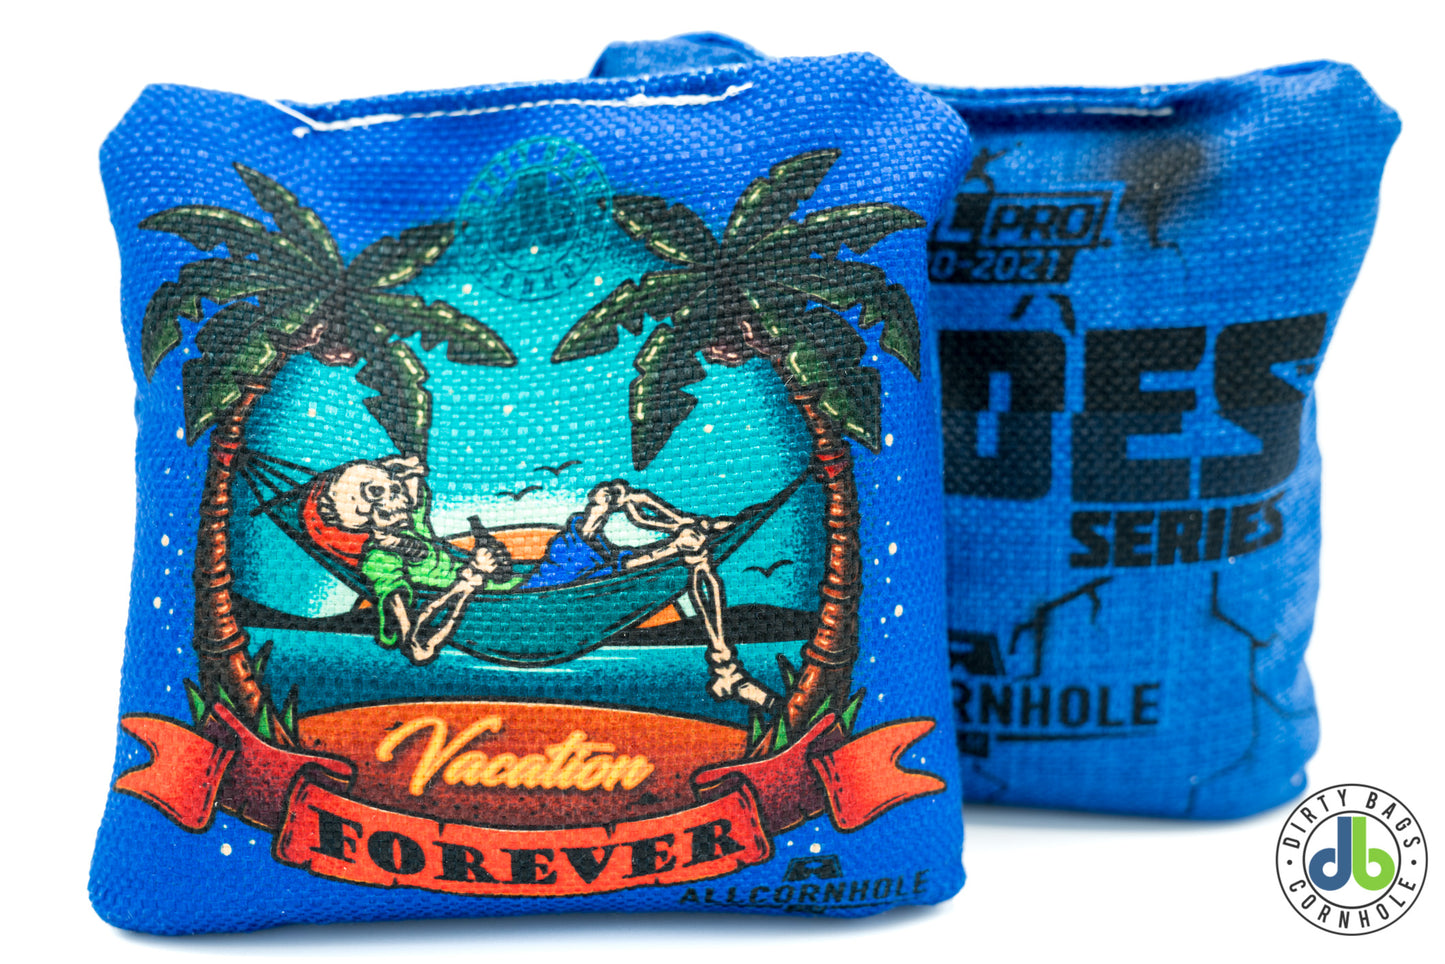 All Slides - db "Vacation Forever" (Set of 4)